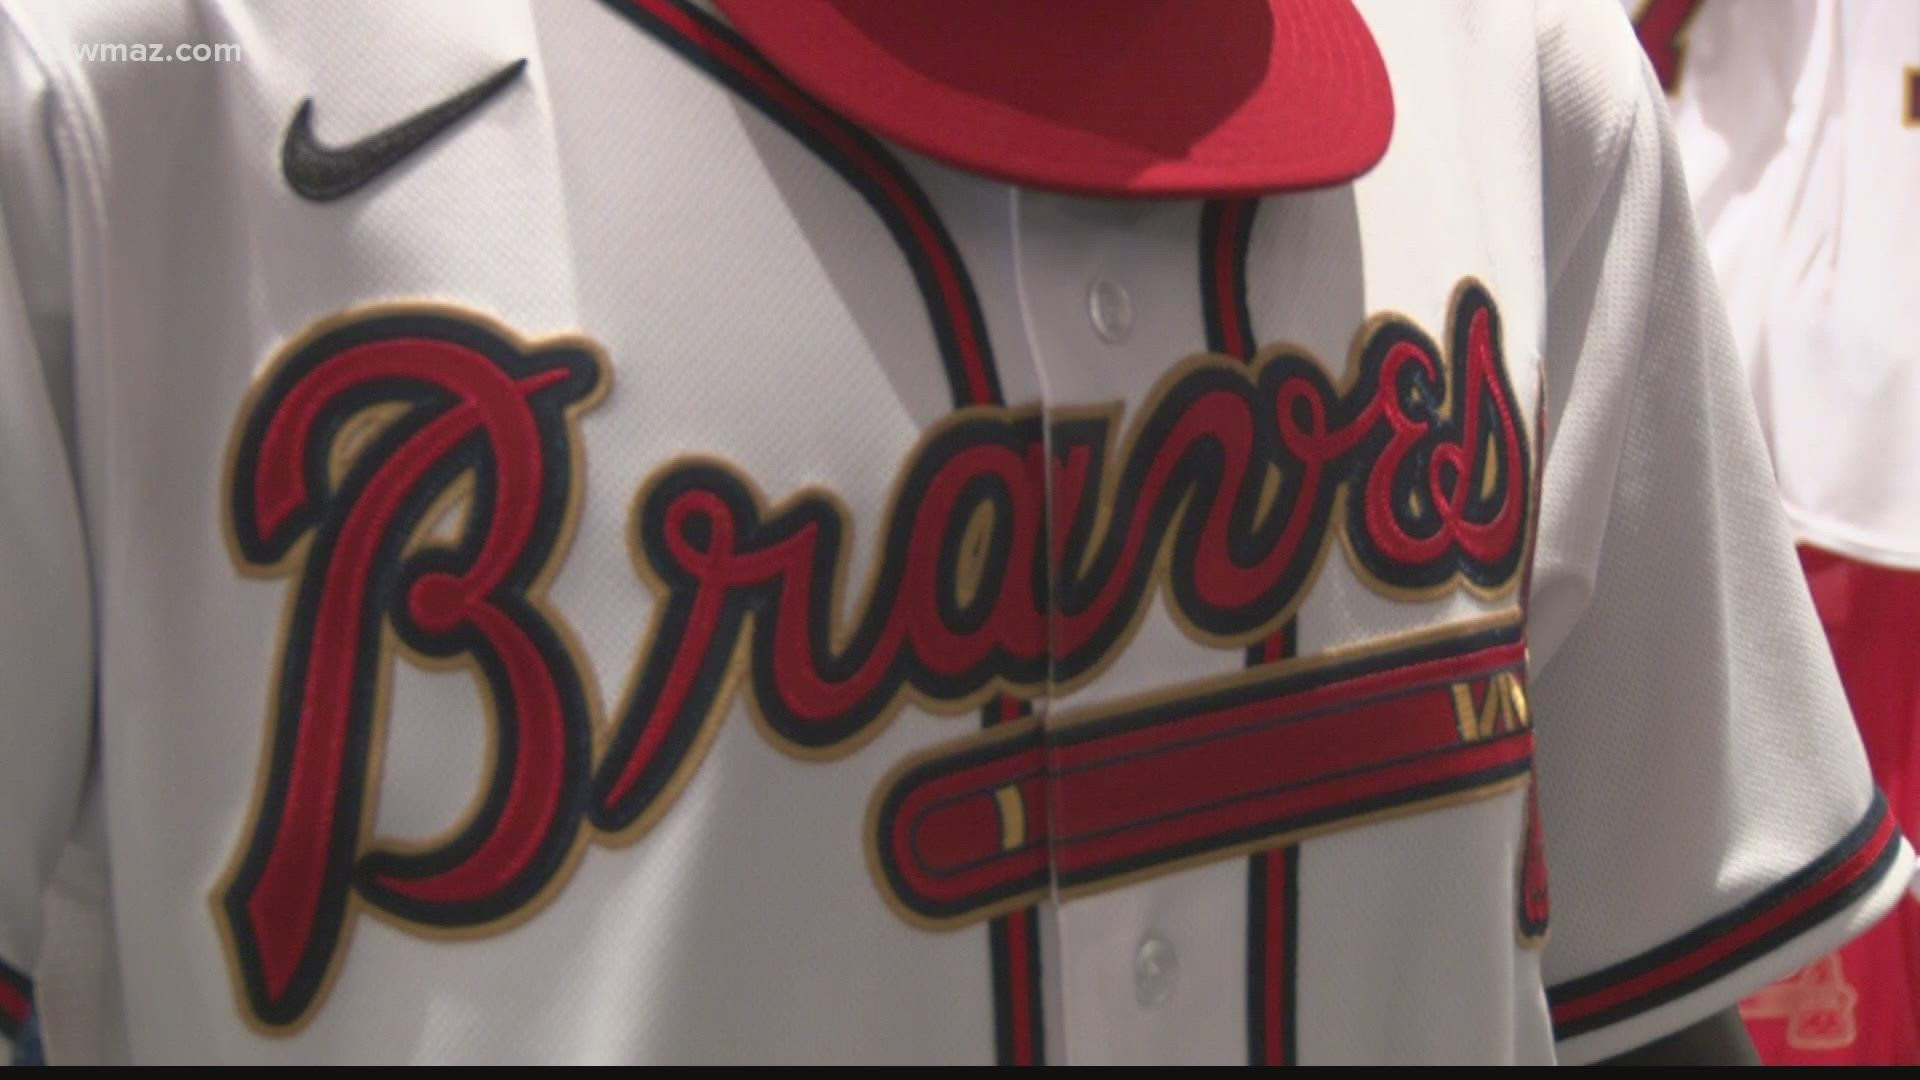 braves opening day jersey 2022